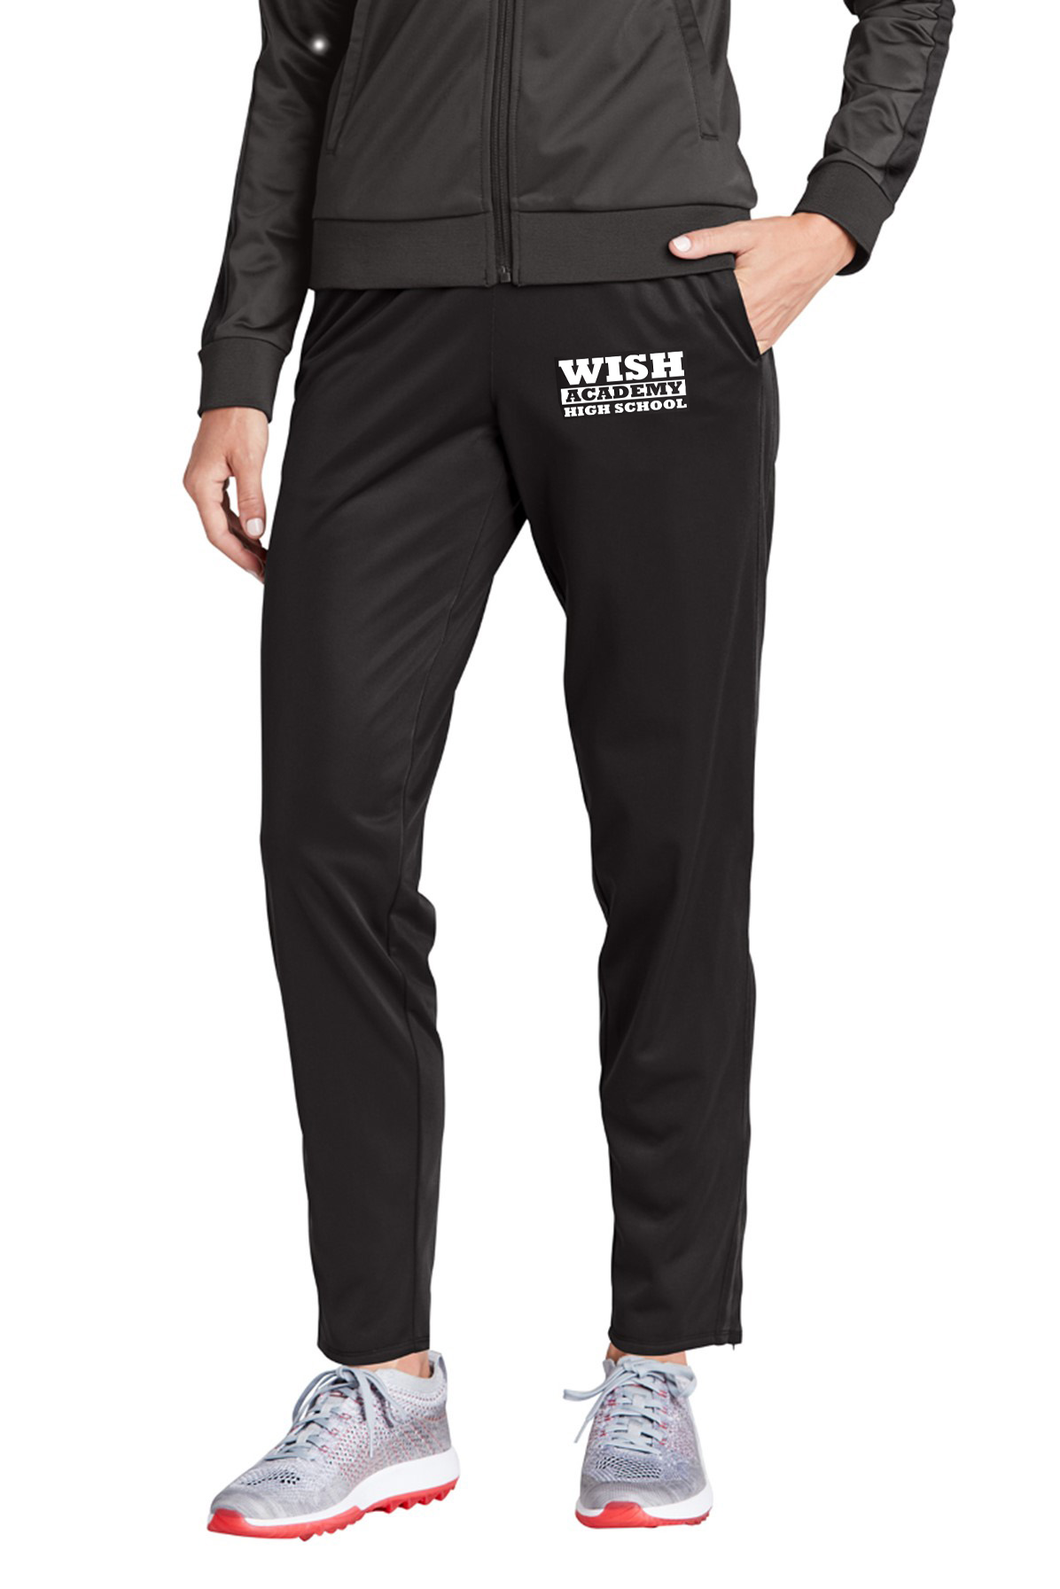 WISH Academy Women's Tapered Leg Athletic Active Pants –